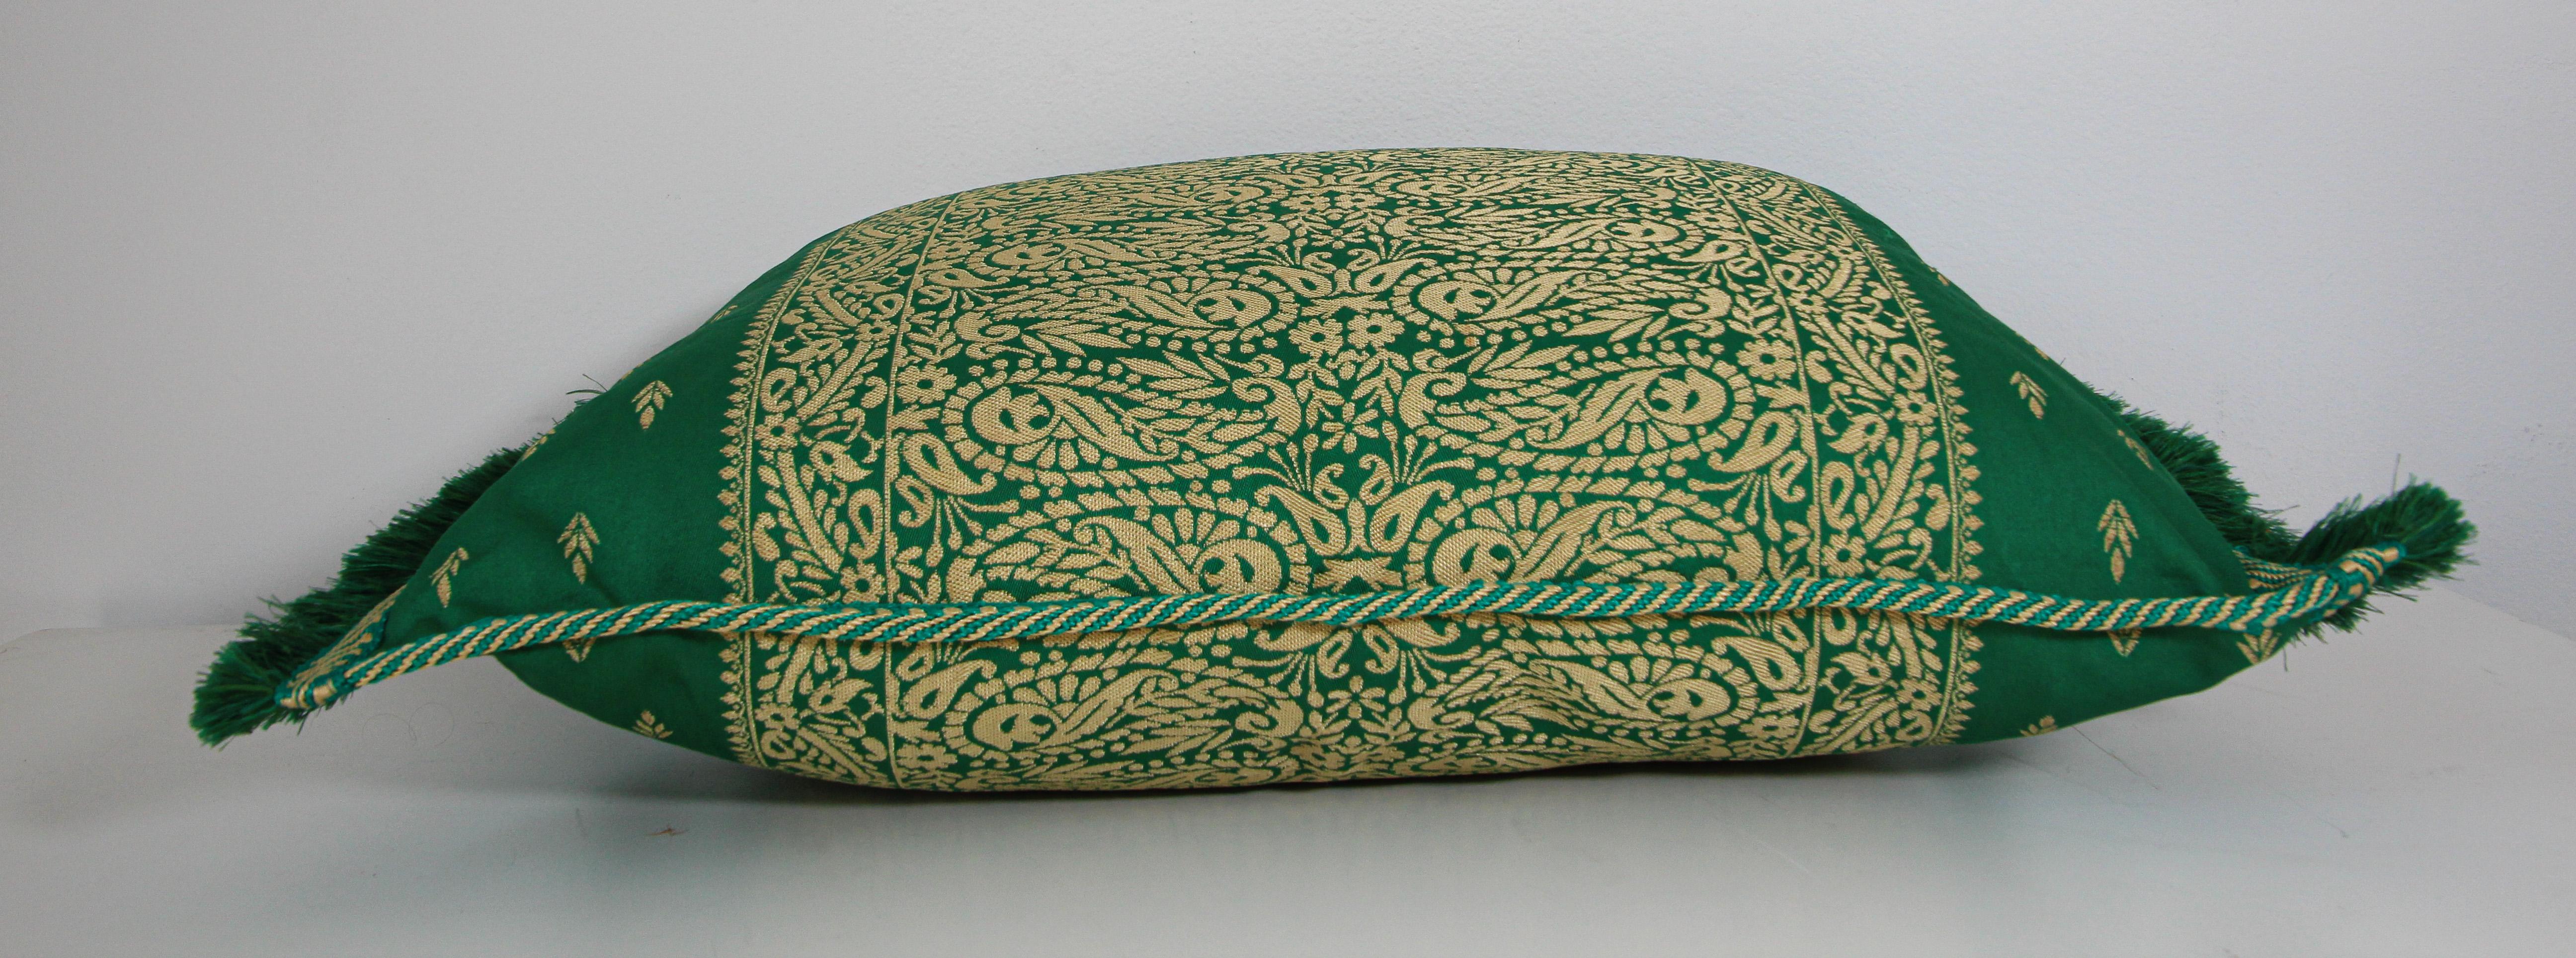 Large Moroccan Damask Green Bolster Lumbar Decorative Pillow In Good Condition For Sale In North Hollywood, CA